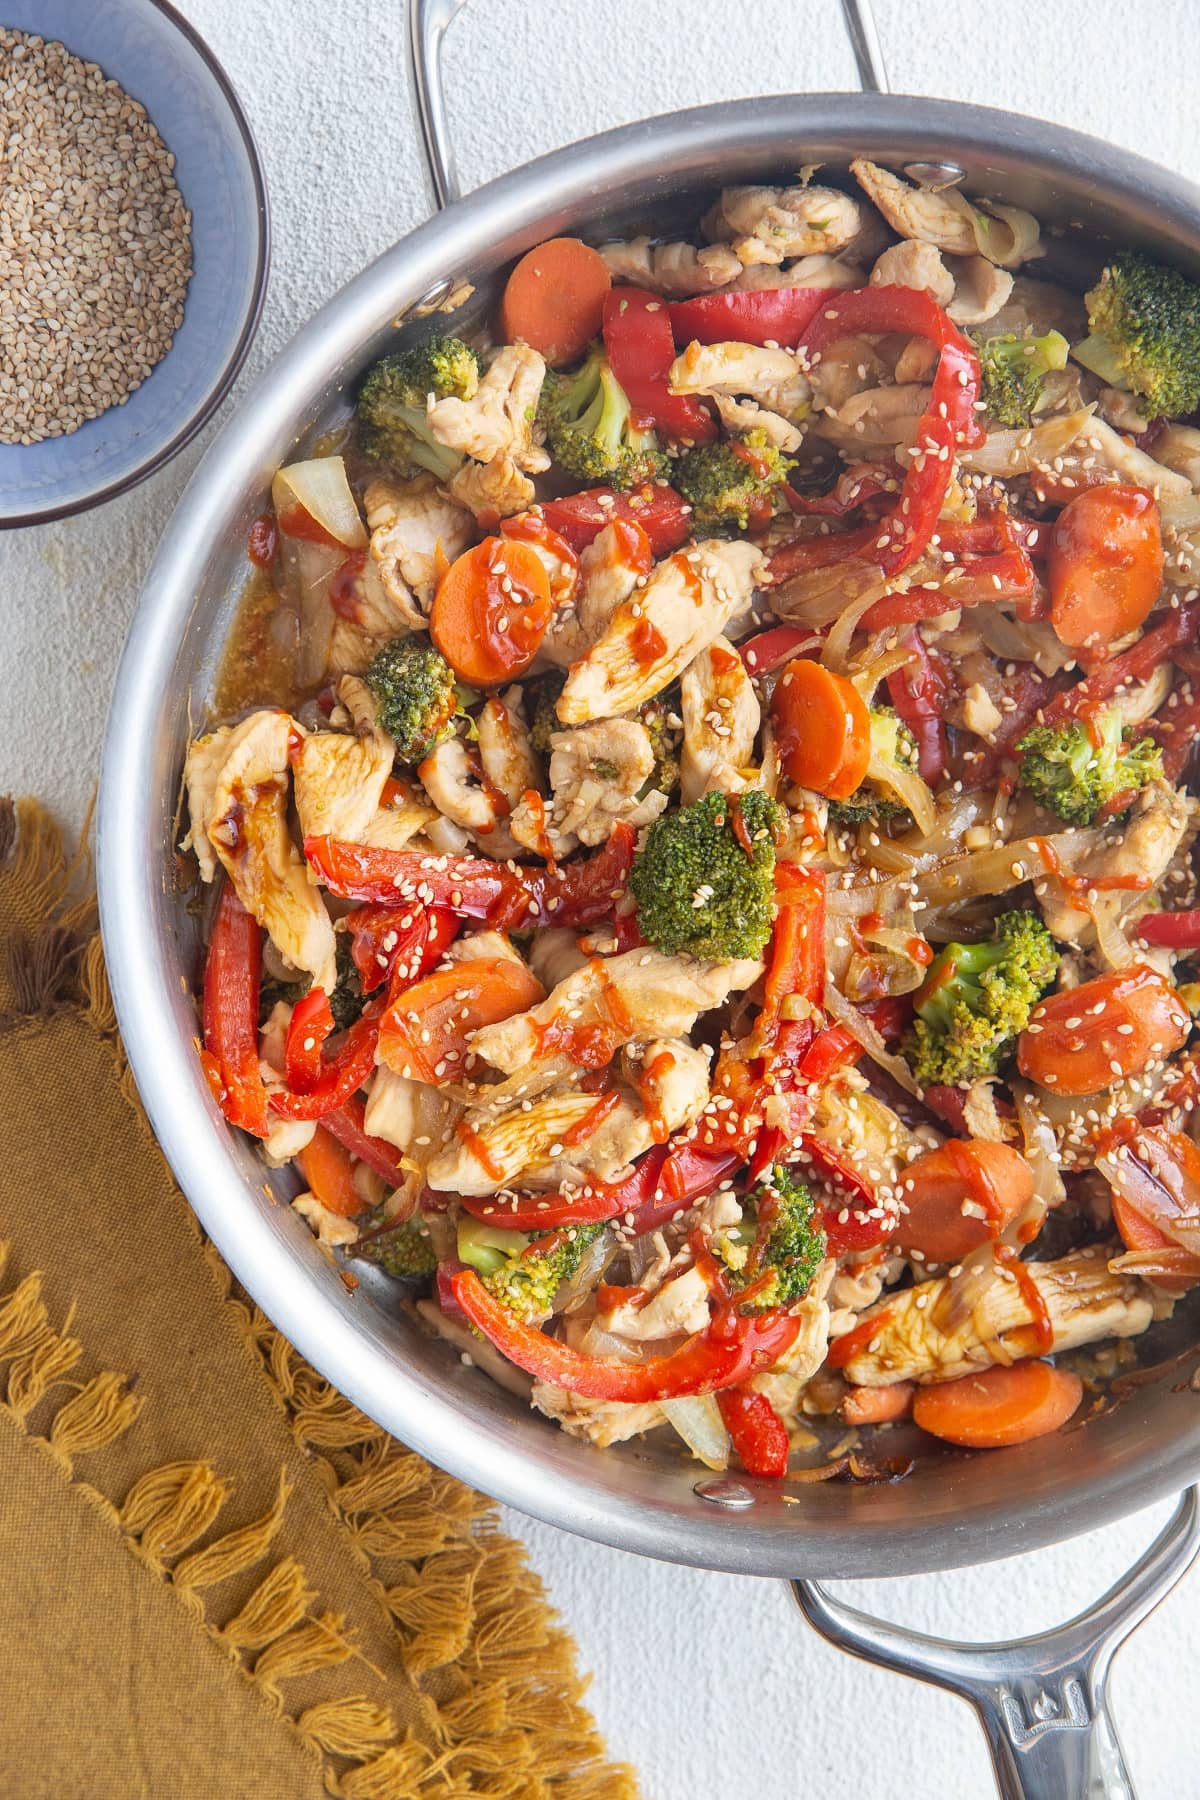 30 Minute Garlic Ginger Chicken Stir Fry The Roasted Root